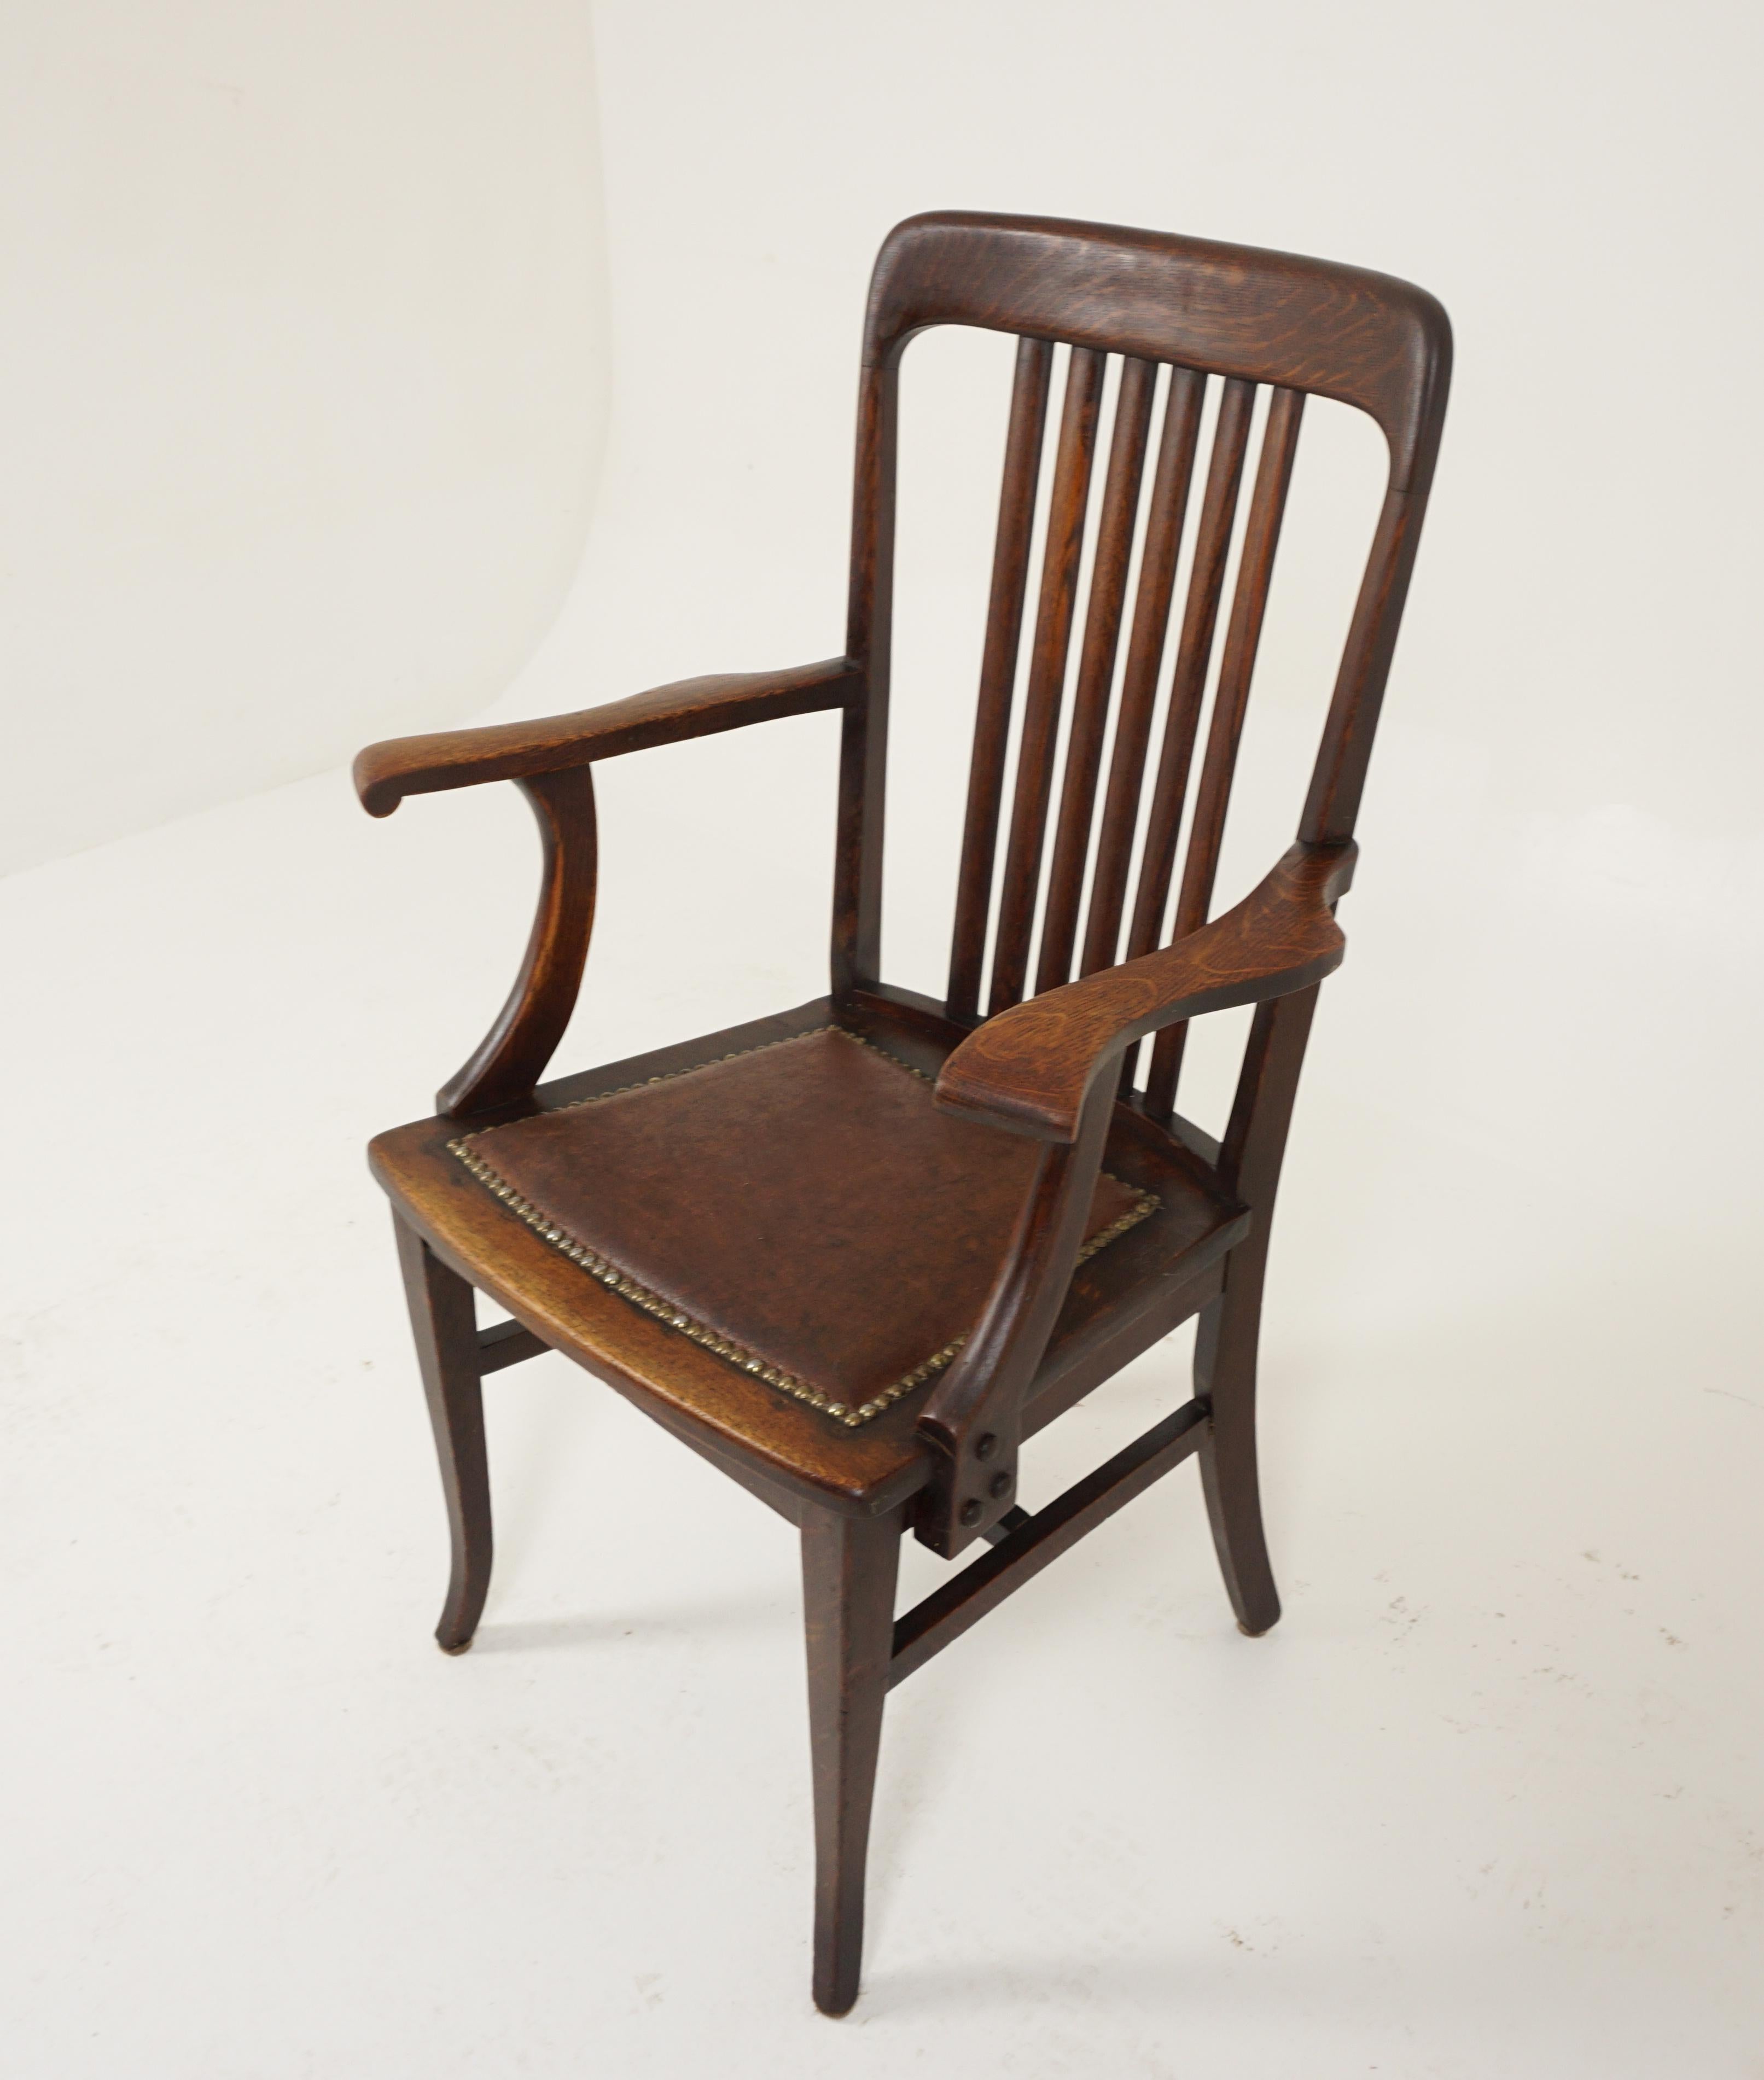 Vintage tiger oak arm chair, dining chair, America 1920, B2480b

America 1920
Solid Oak
Original finish
Rounded top rail
Six vertical slats to the back
Upholstered leather seat
Splayed out tapered front legs
Connected with H stretcher